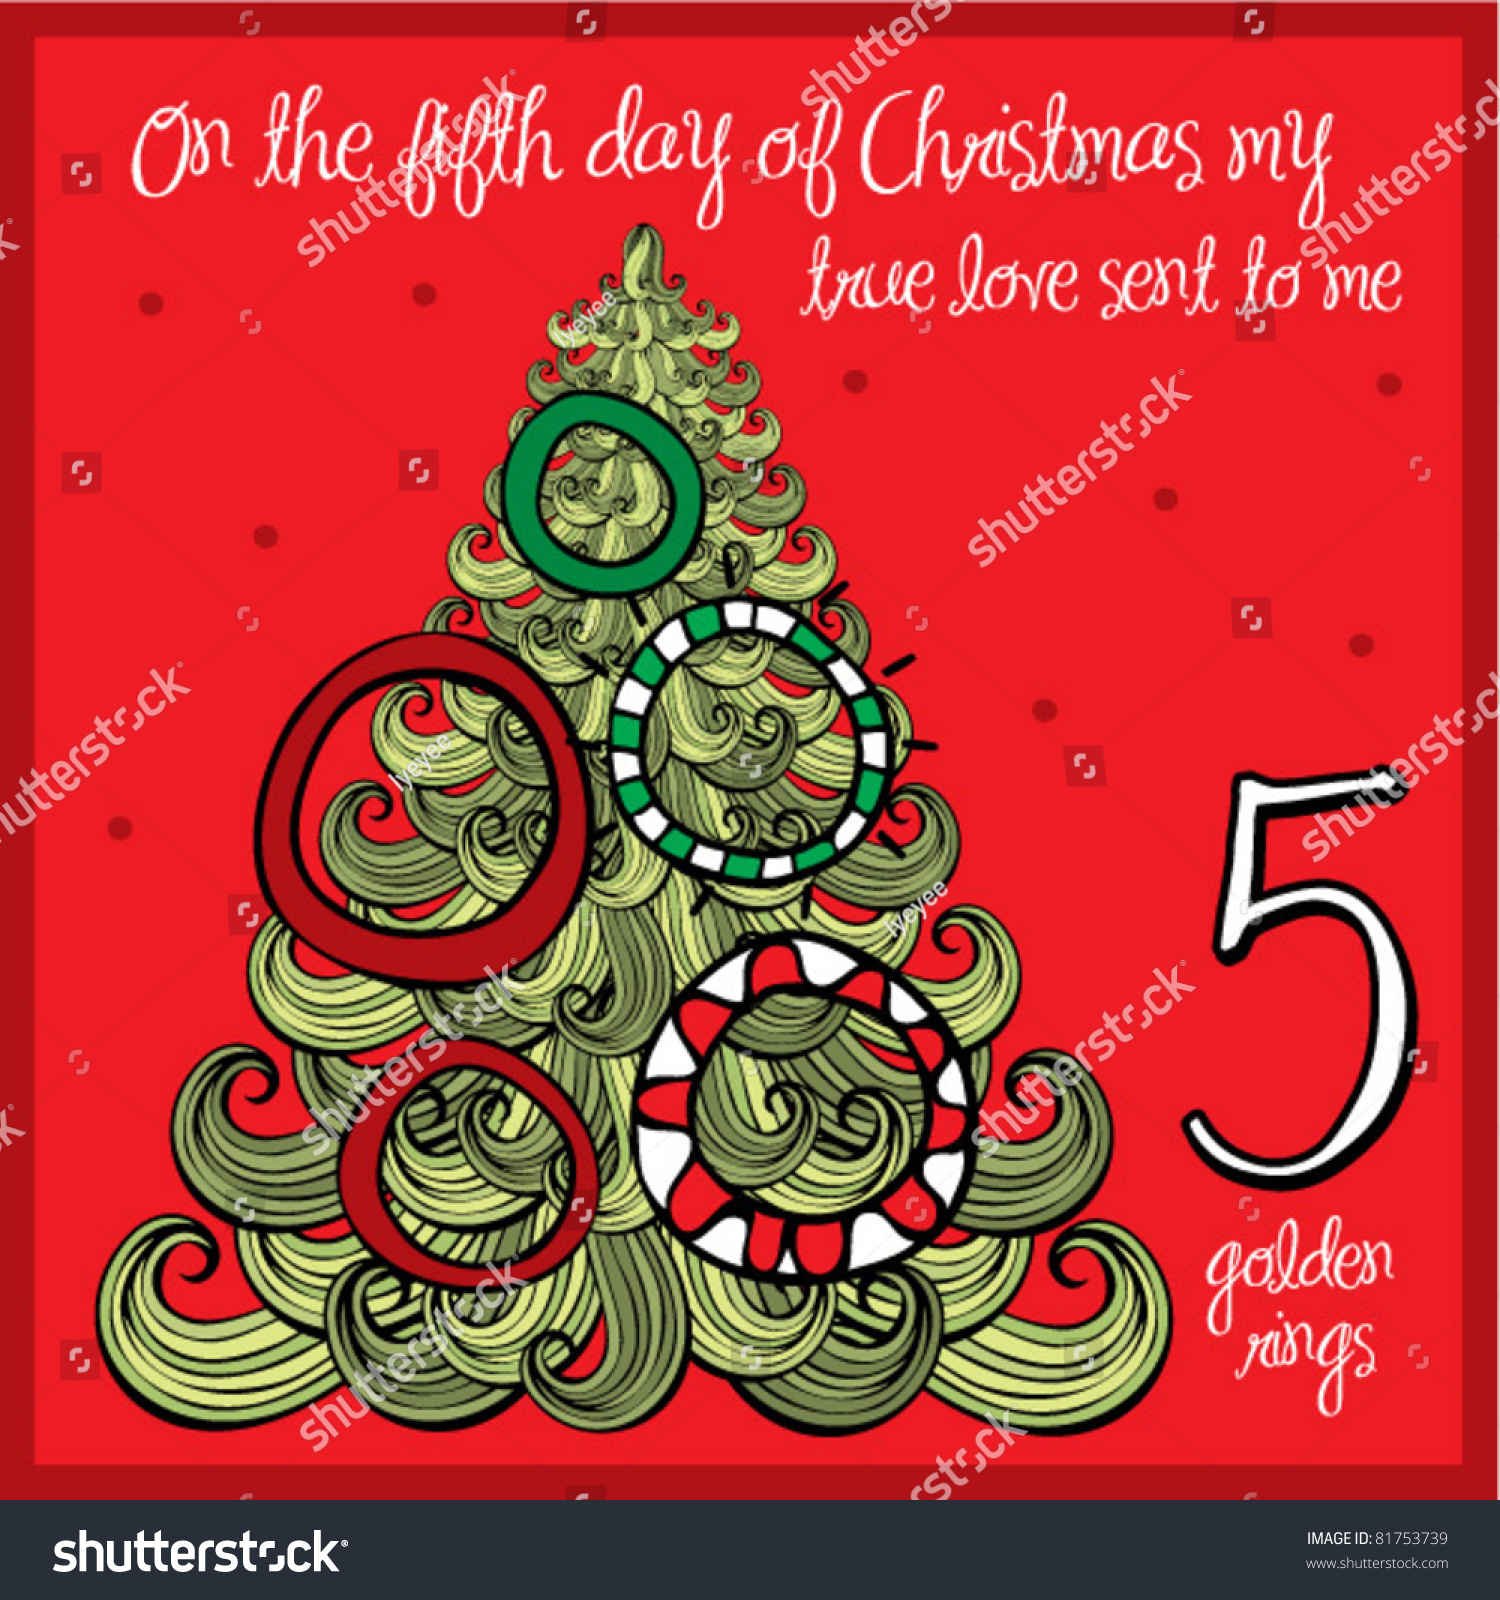 Albums 101+ Pictures Five Golden Rings 12 Days Of Christmas Stunning